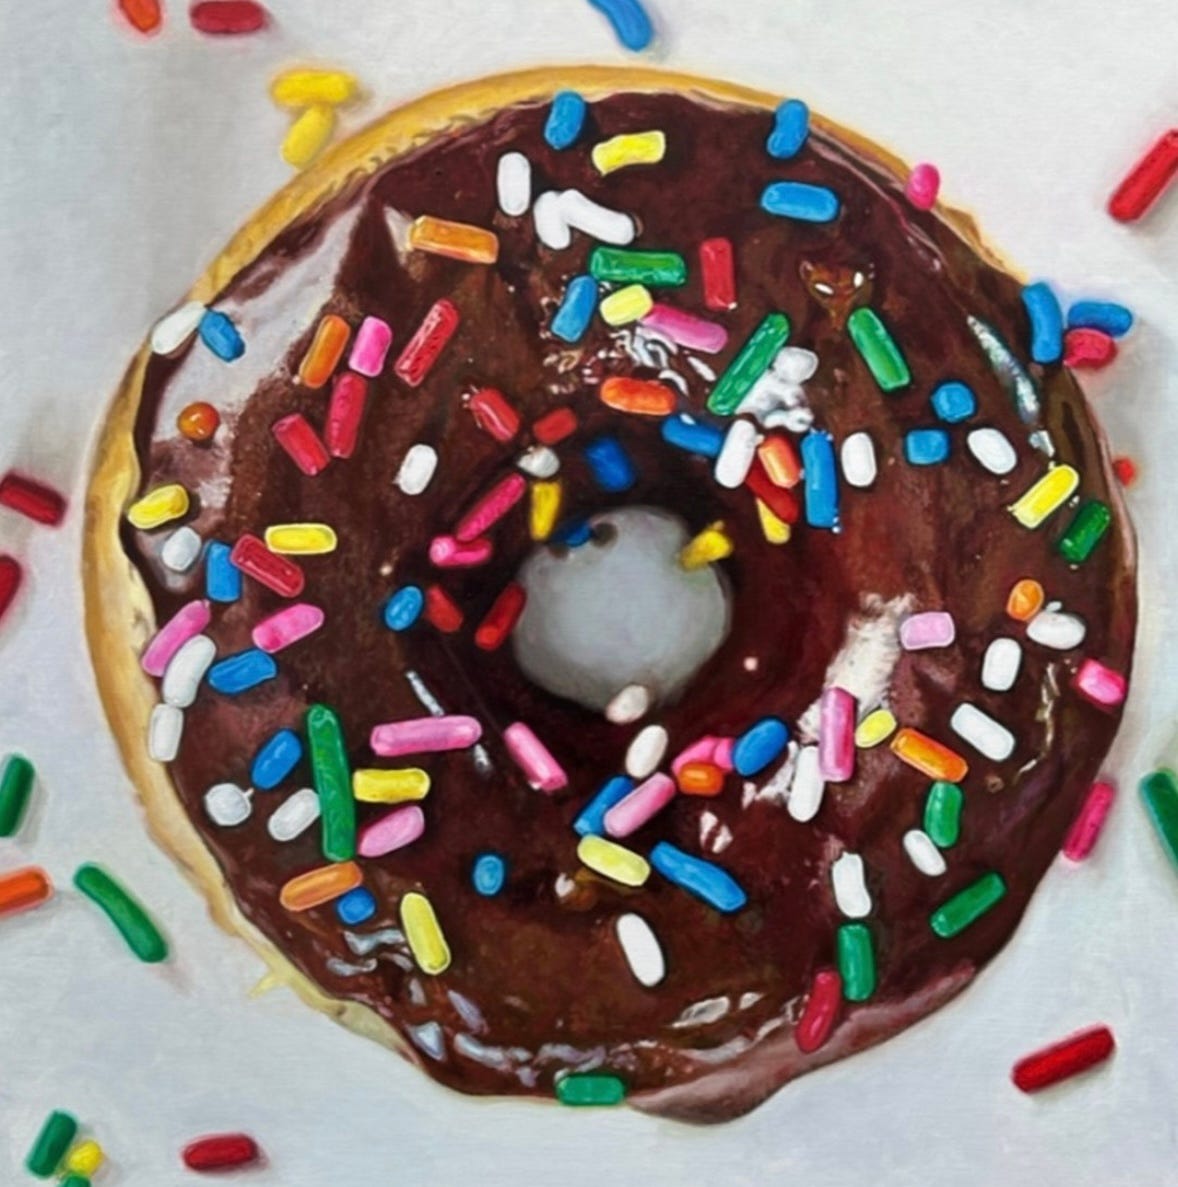 A chocolate donut with sprinkles

Description automatically generated